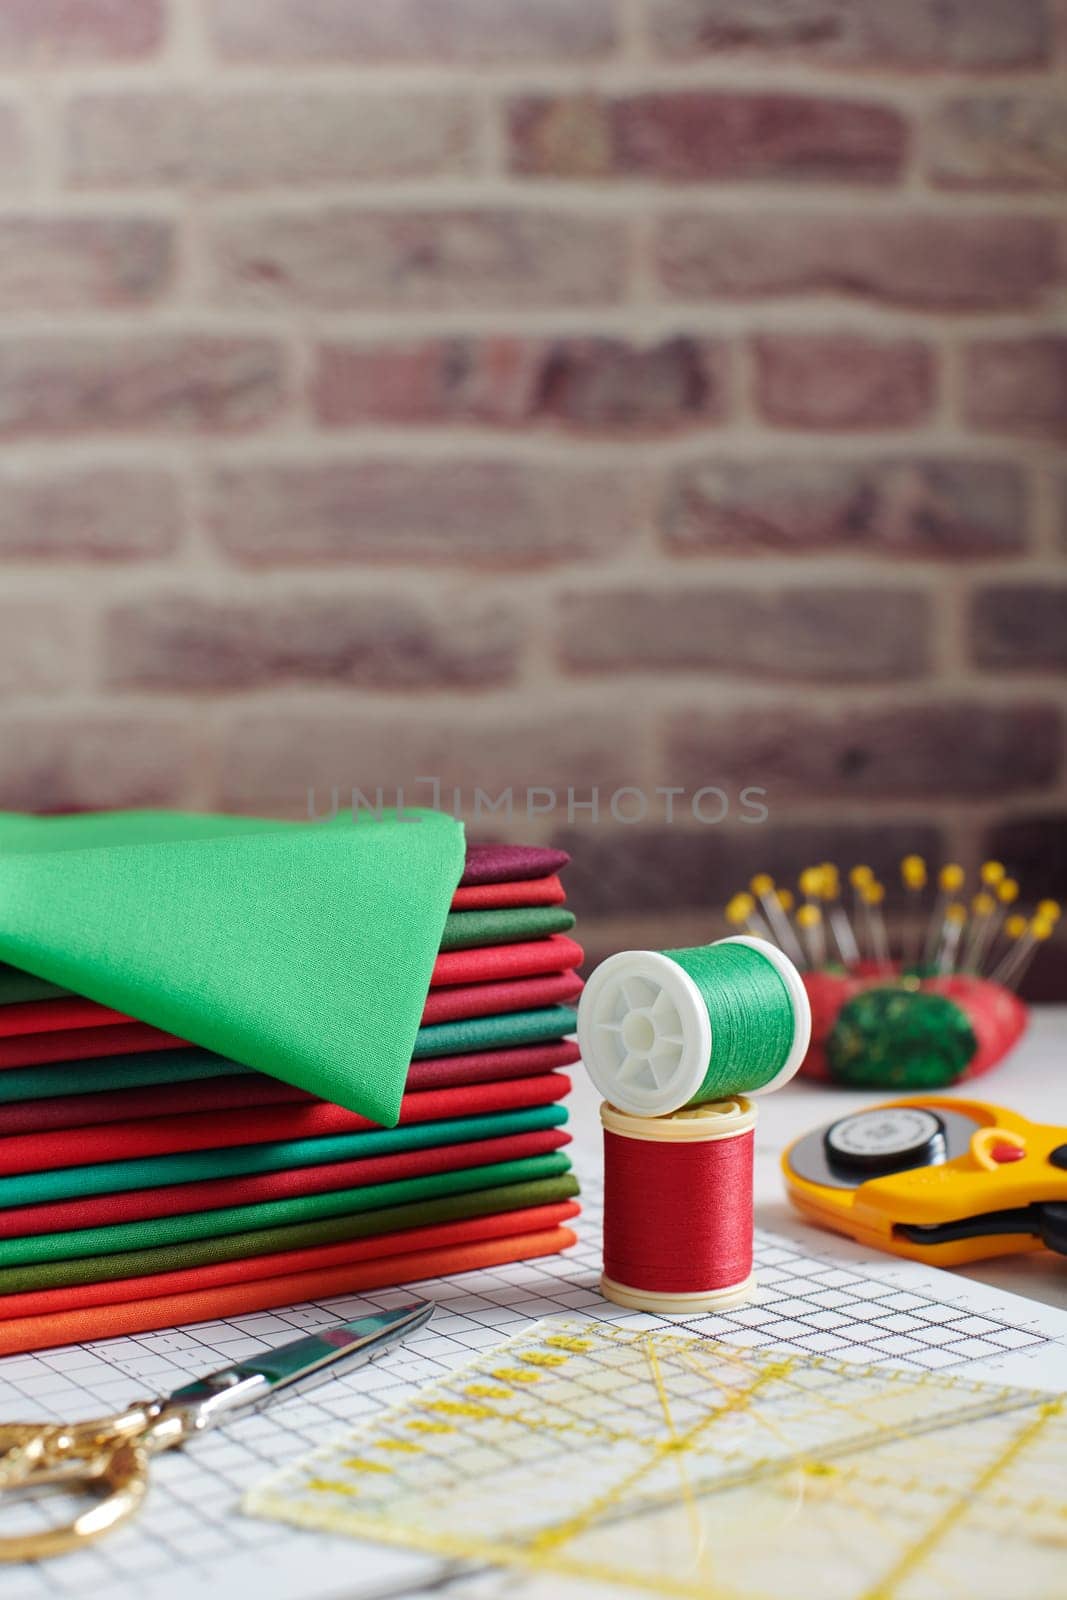 Stack of red and green fabrics surrounded by sewing and quilting accessories on brick wall background